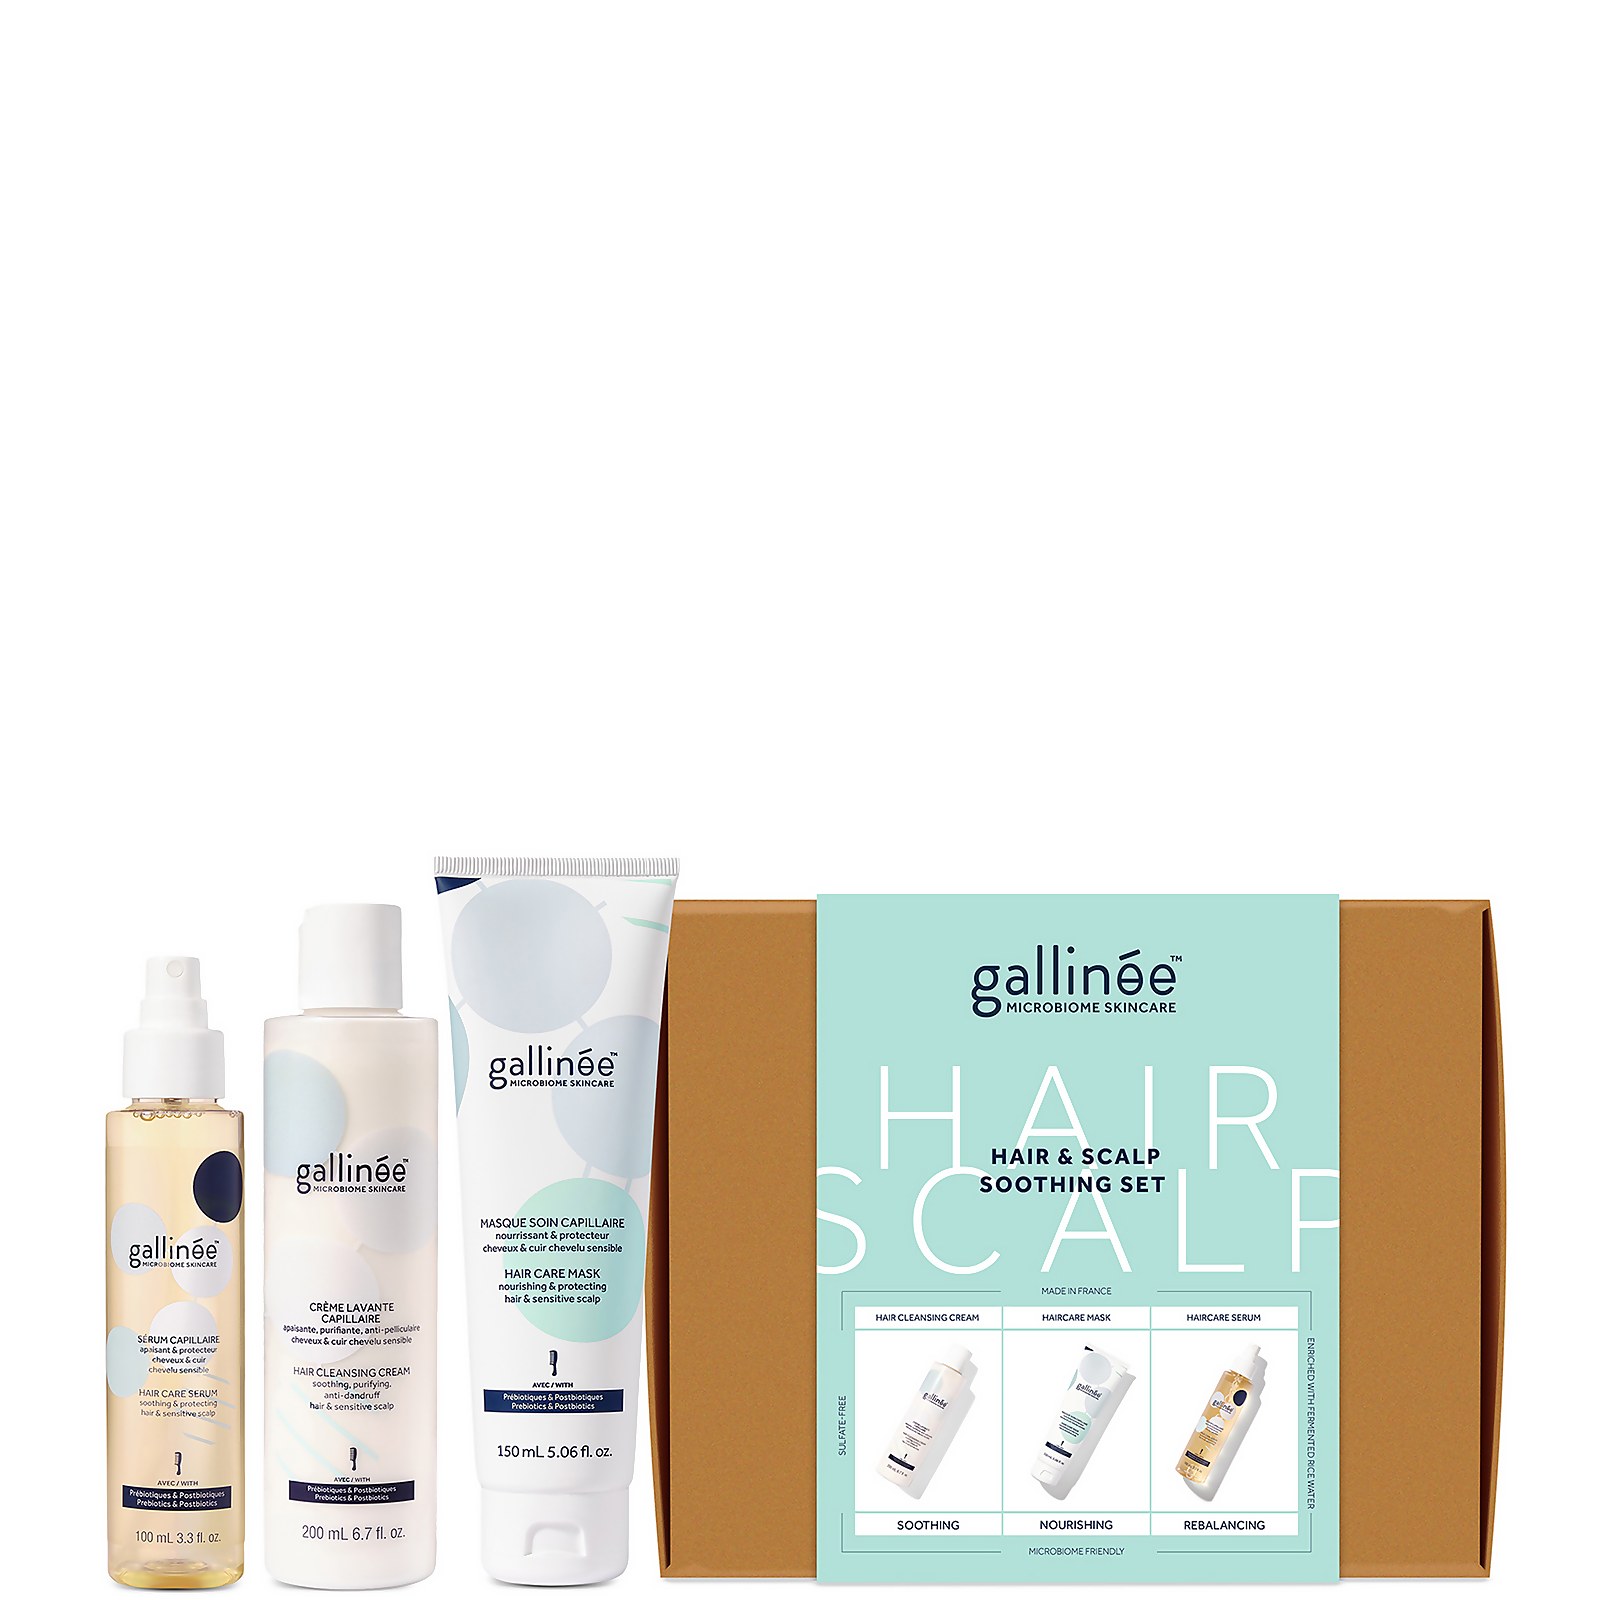 Gallinee Hair and Scalp Soothing Set